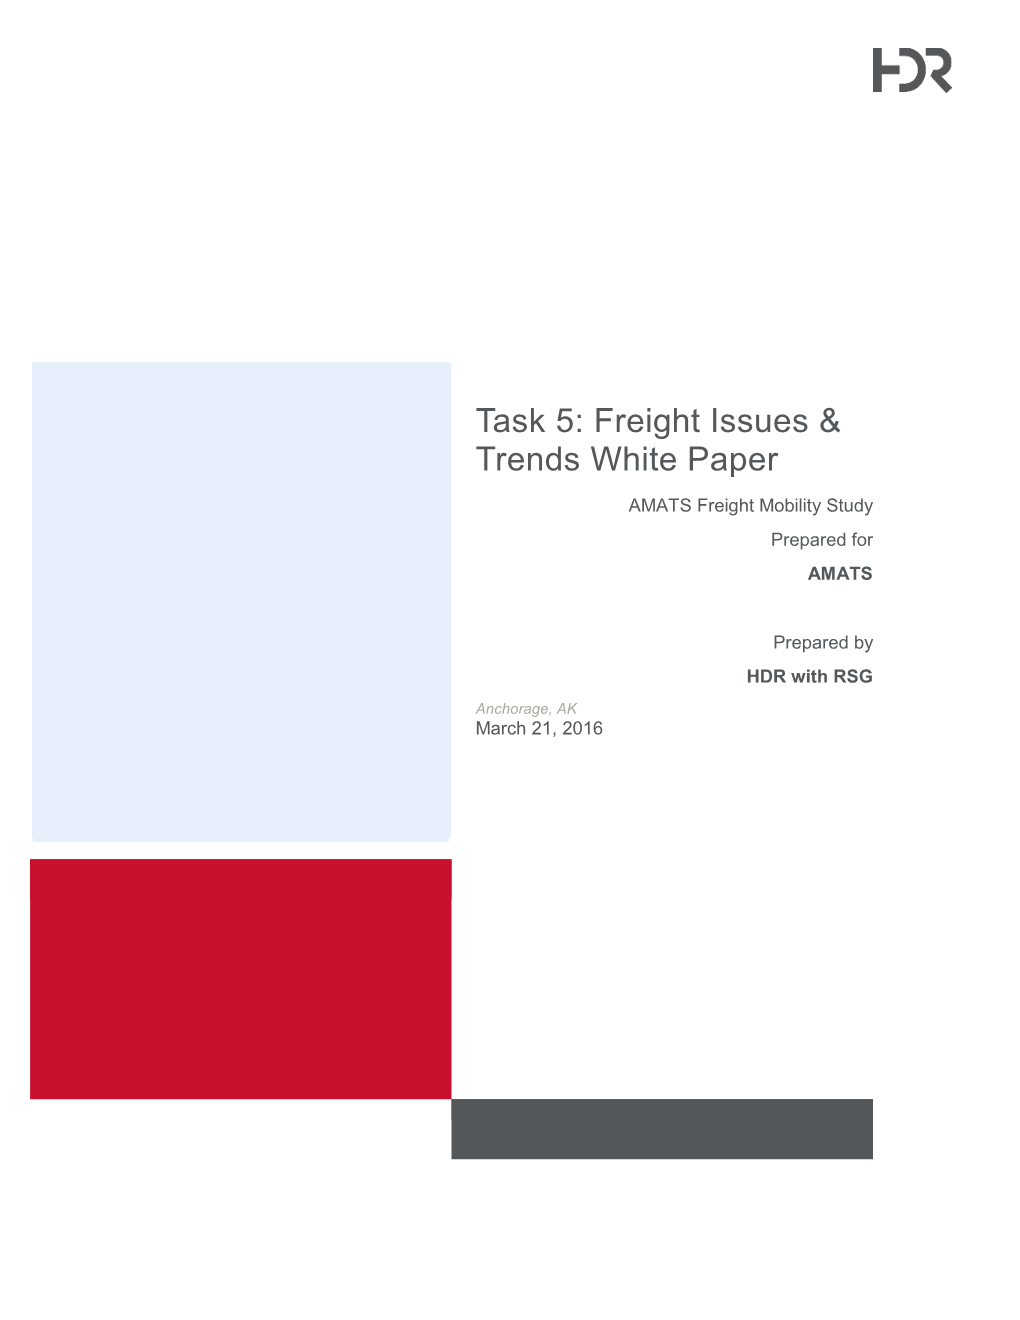 Task 5: Freight Issues & Trends White Paper